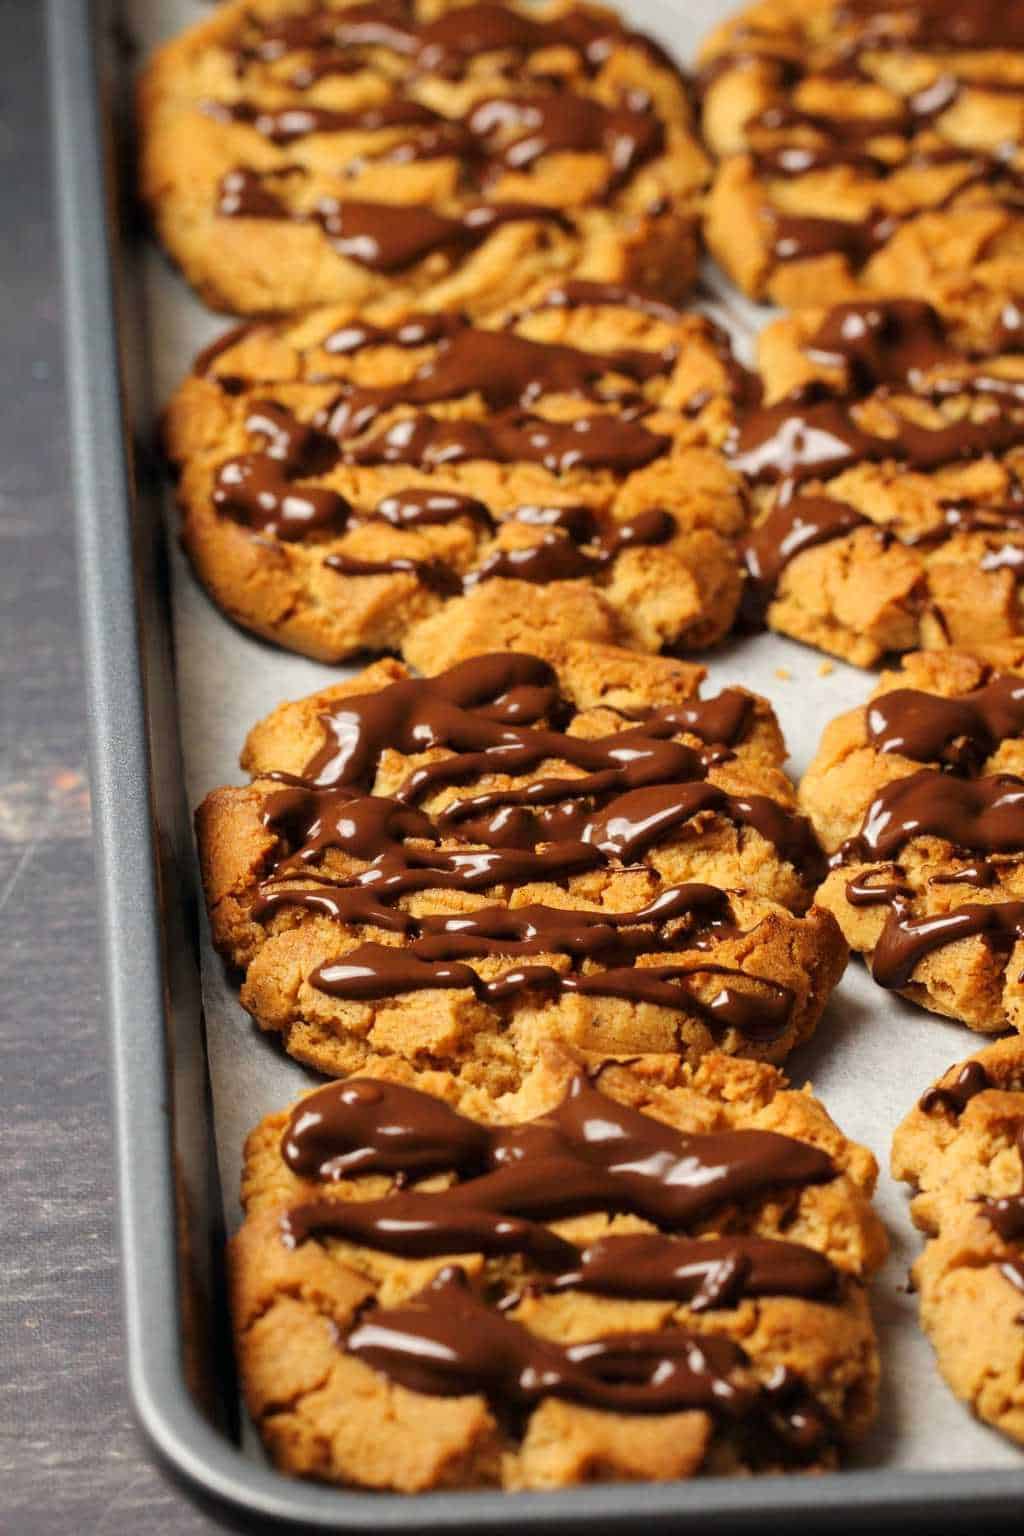 Vegan almond butter cookies freshly baked on a parchment lined baking tray, with drizzled melted chocolate.